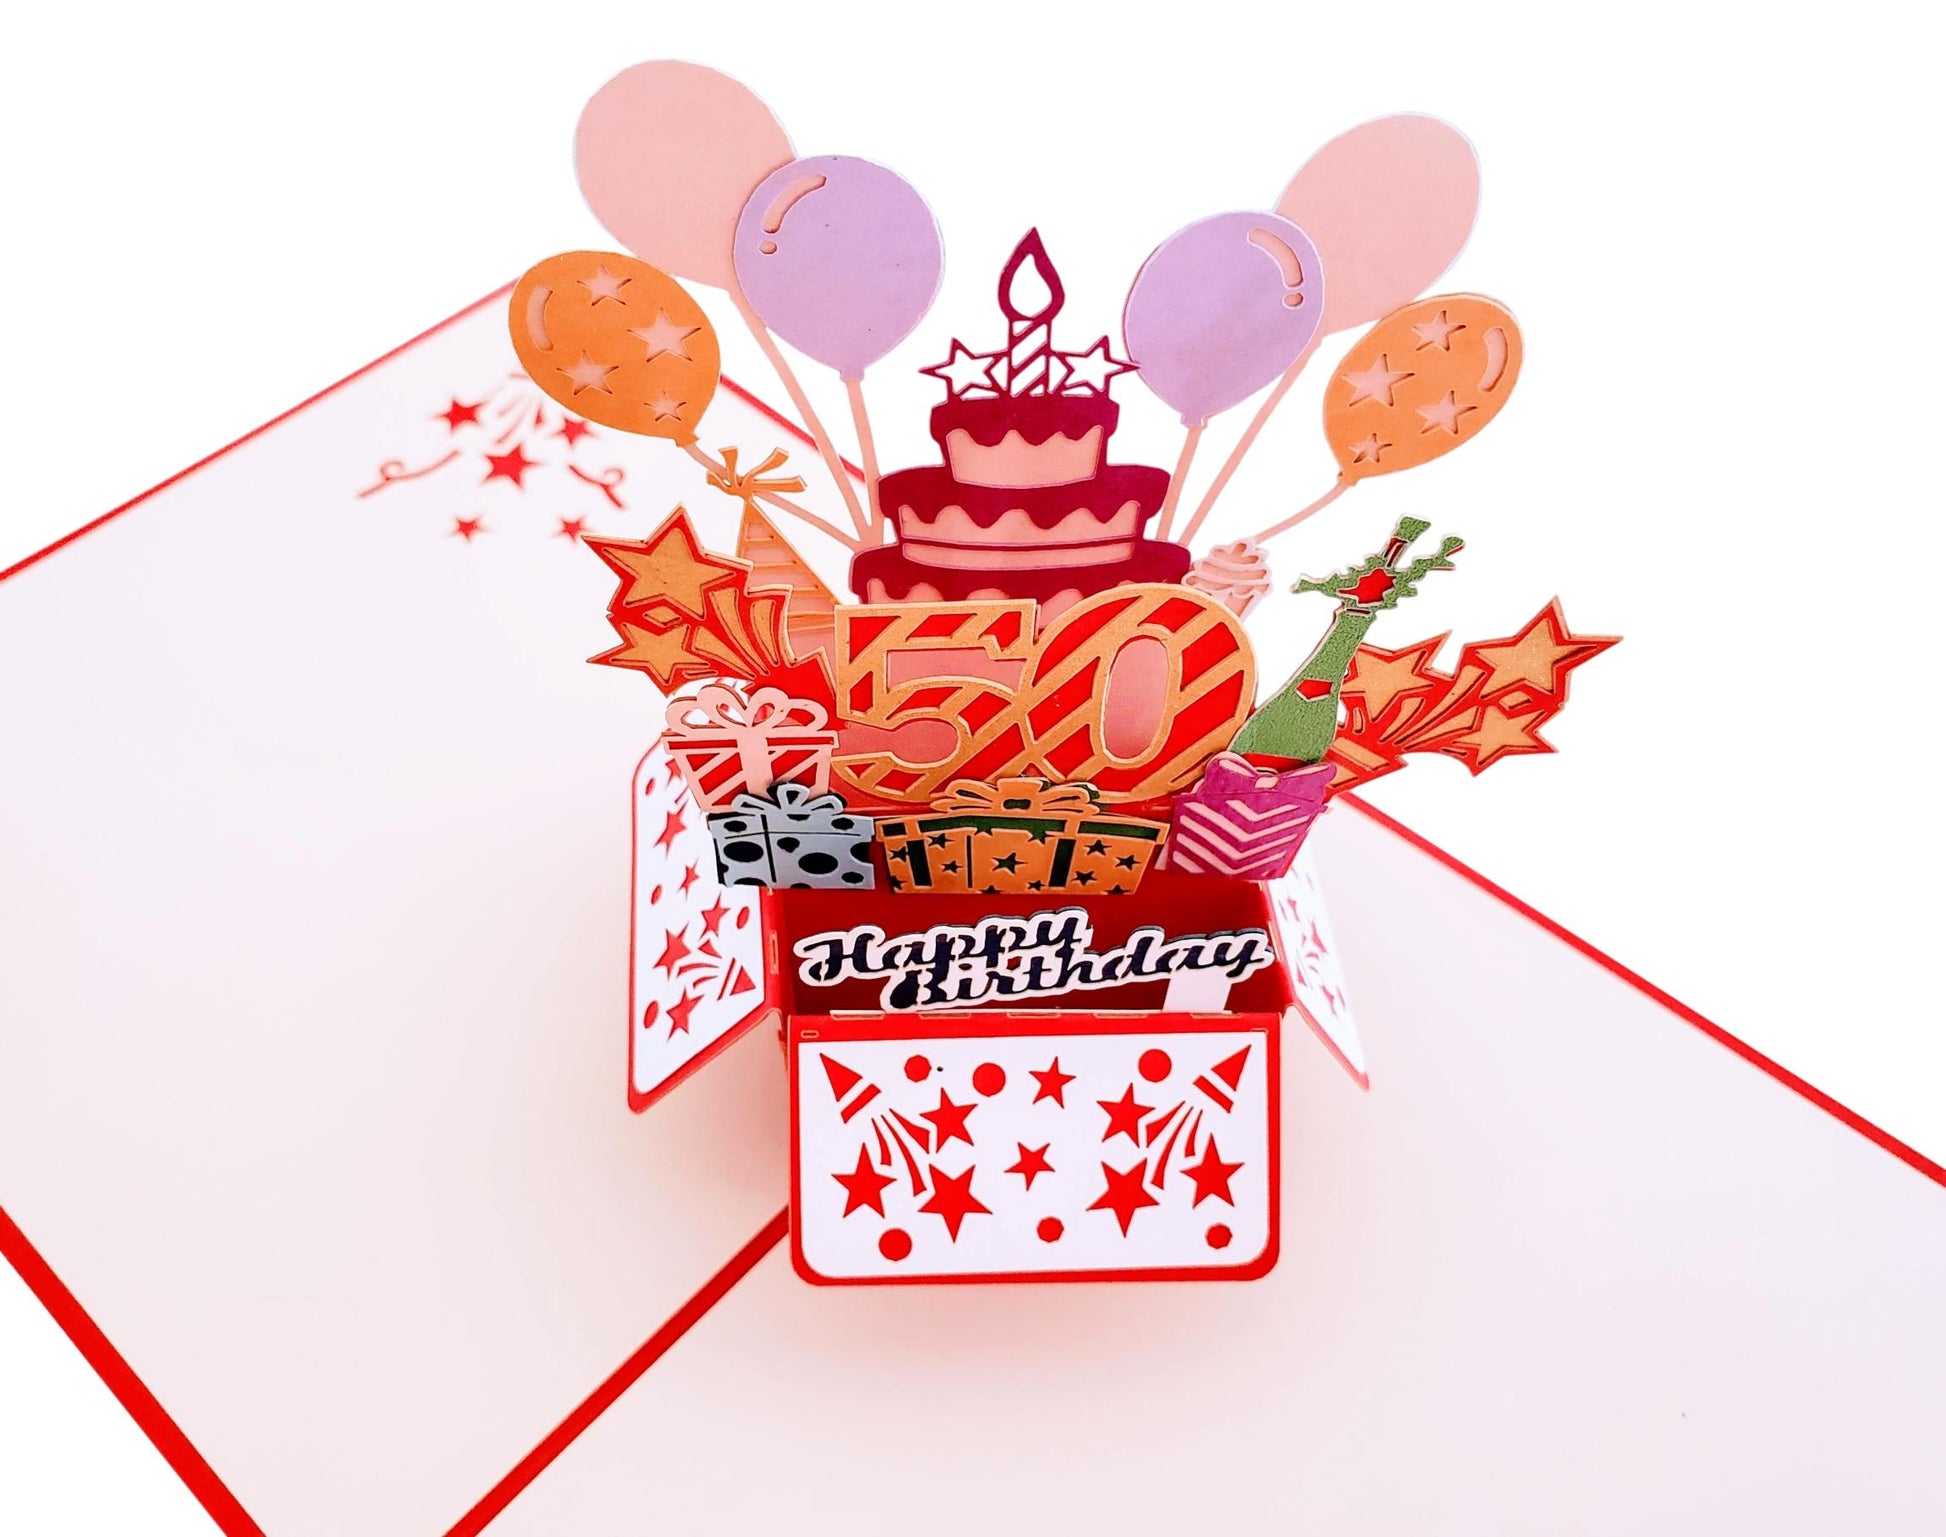 Happy 50th Birthday Red Party Box 3D Pop Up Greeting Card - Birthday - Fun - Milestone - Special Day - iGifts And Cards